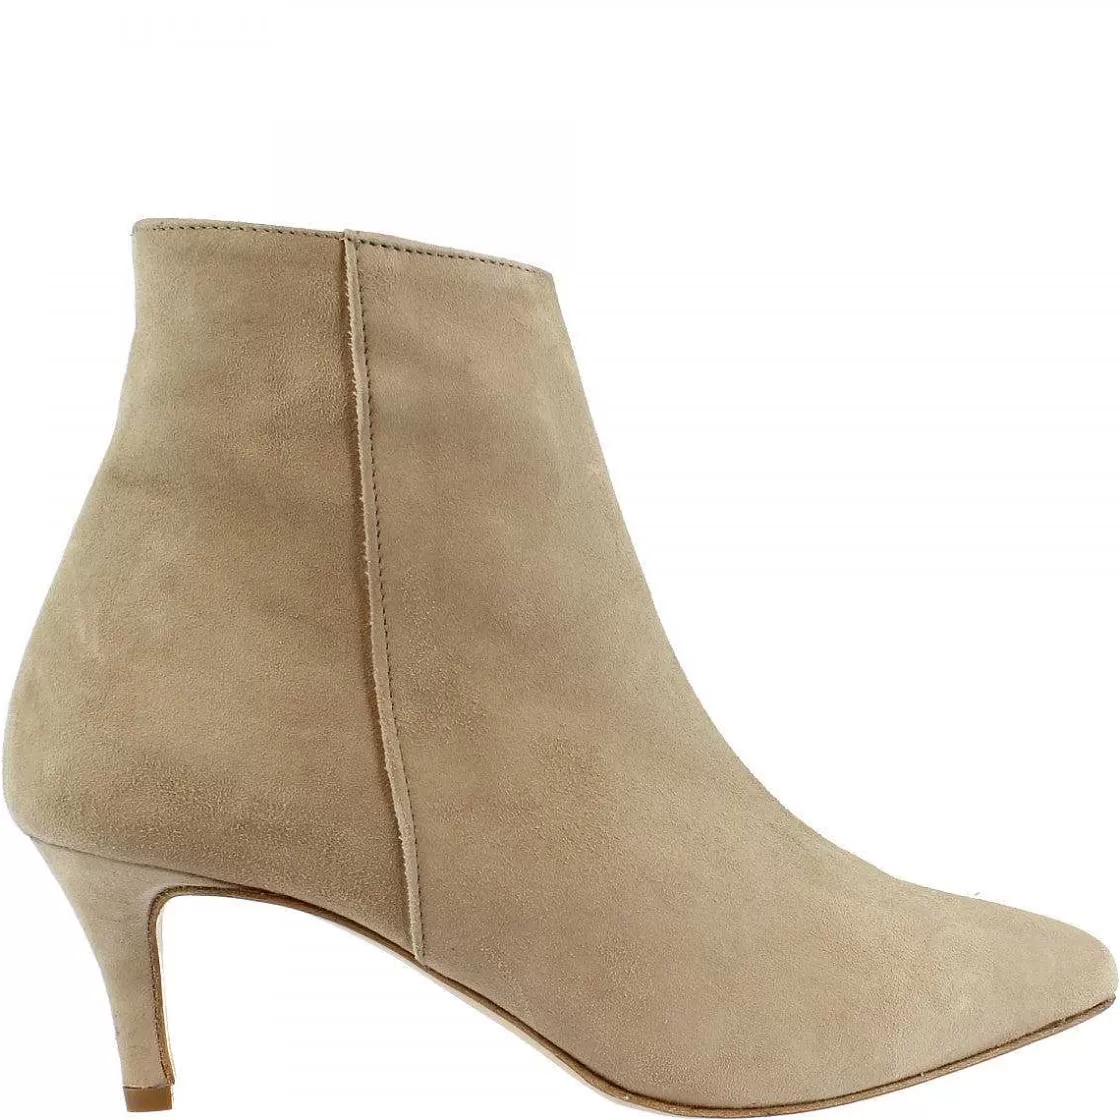 Leonardo Women'S Handmade Pointed Toe Heels Ankle Boots In Taupe Suede Leather Hot